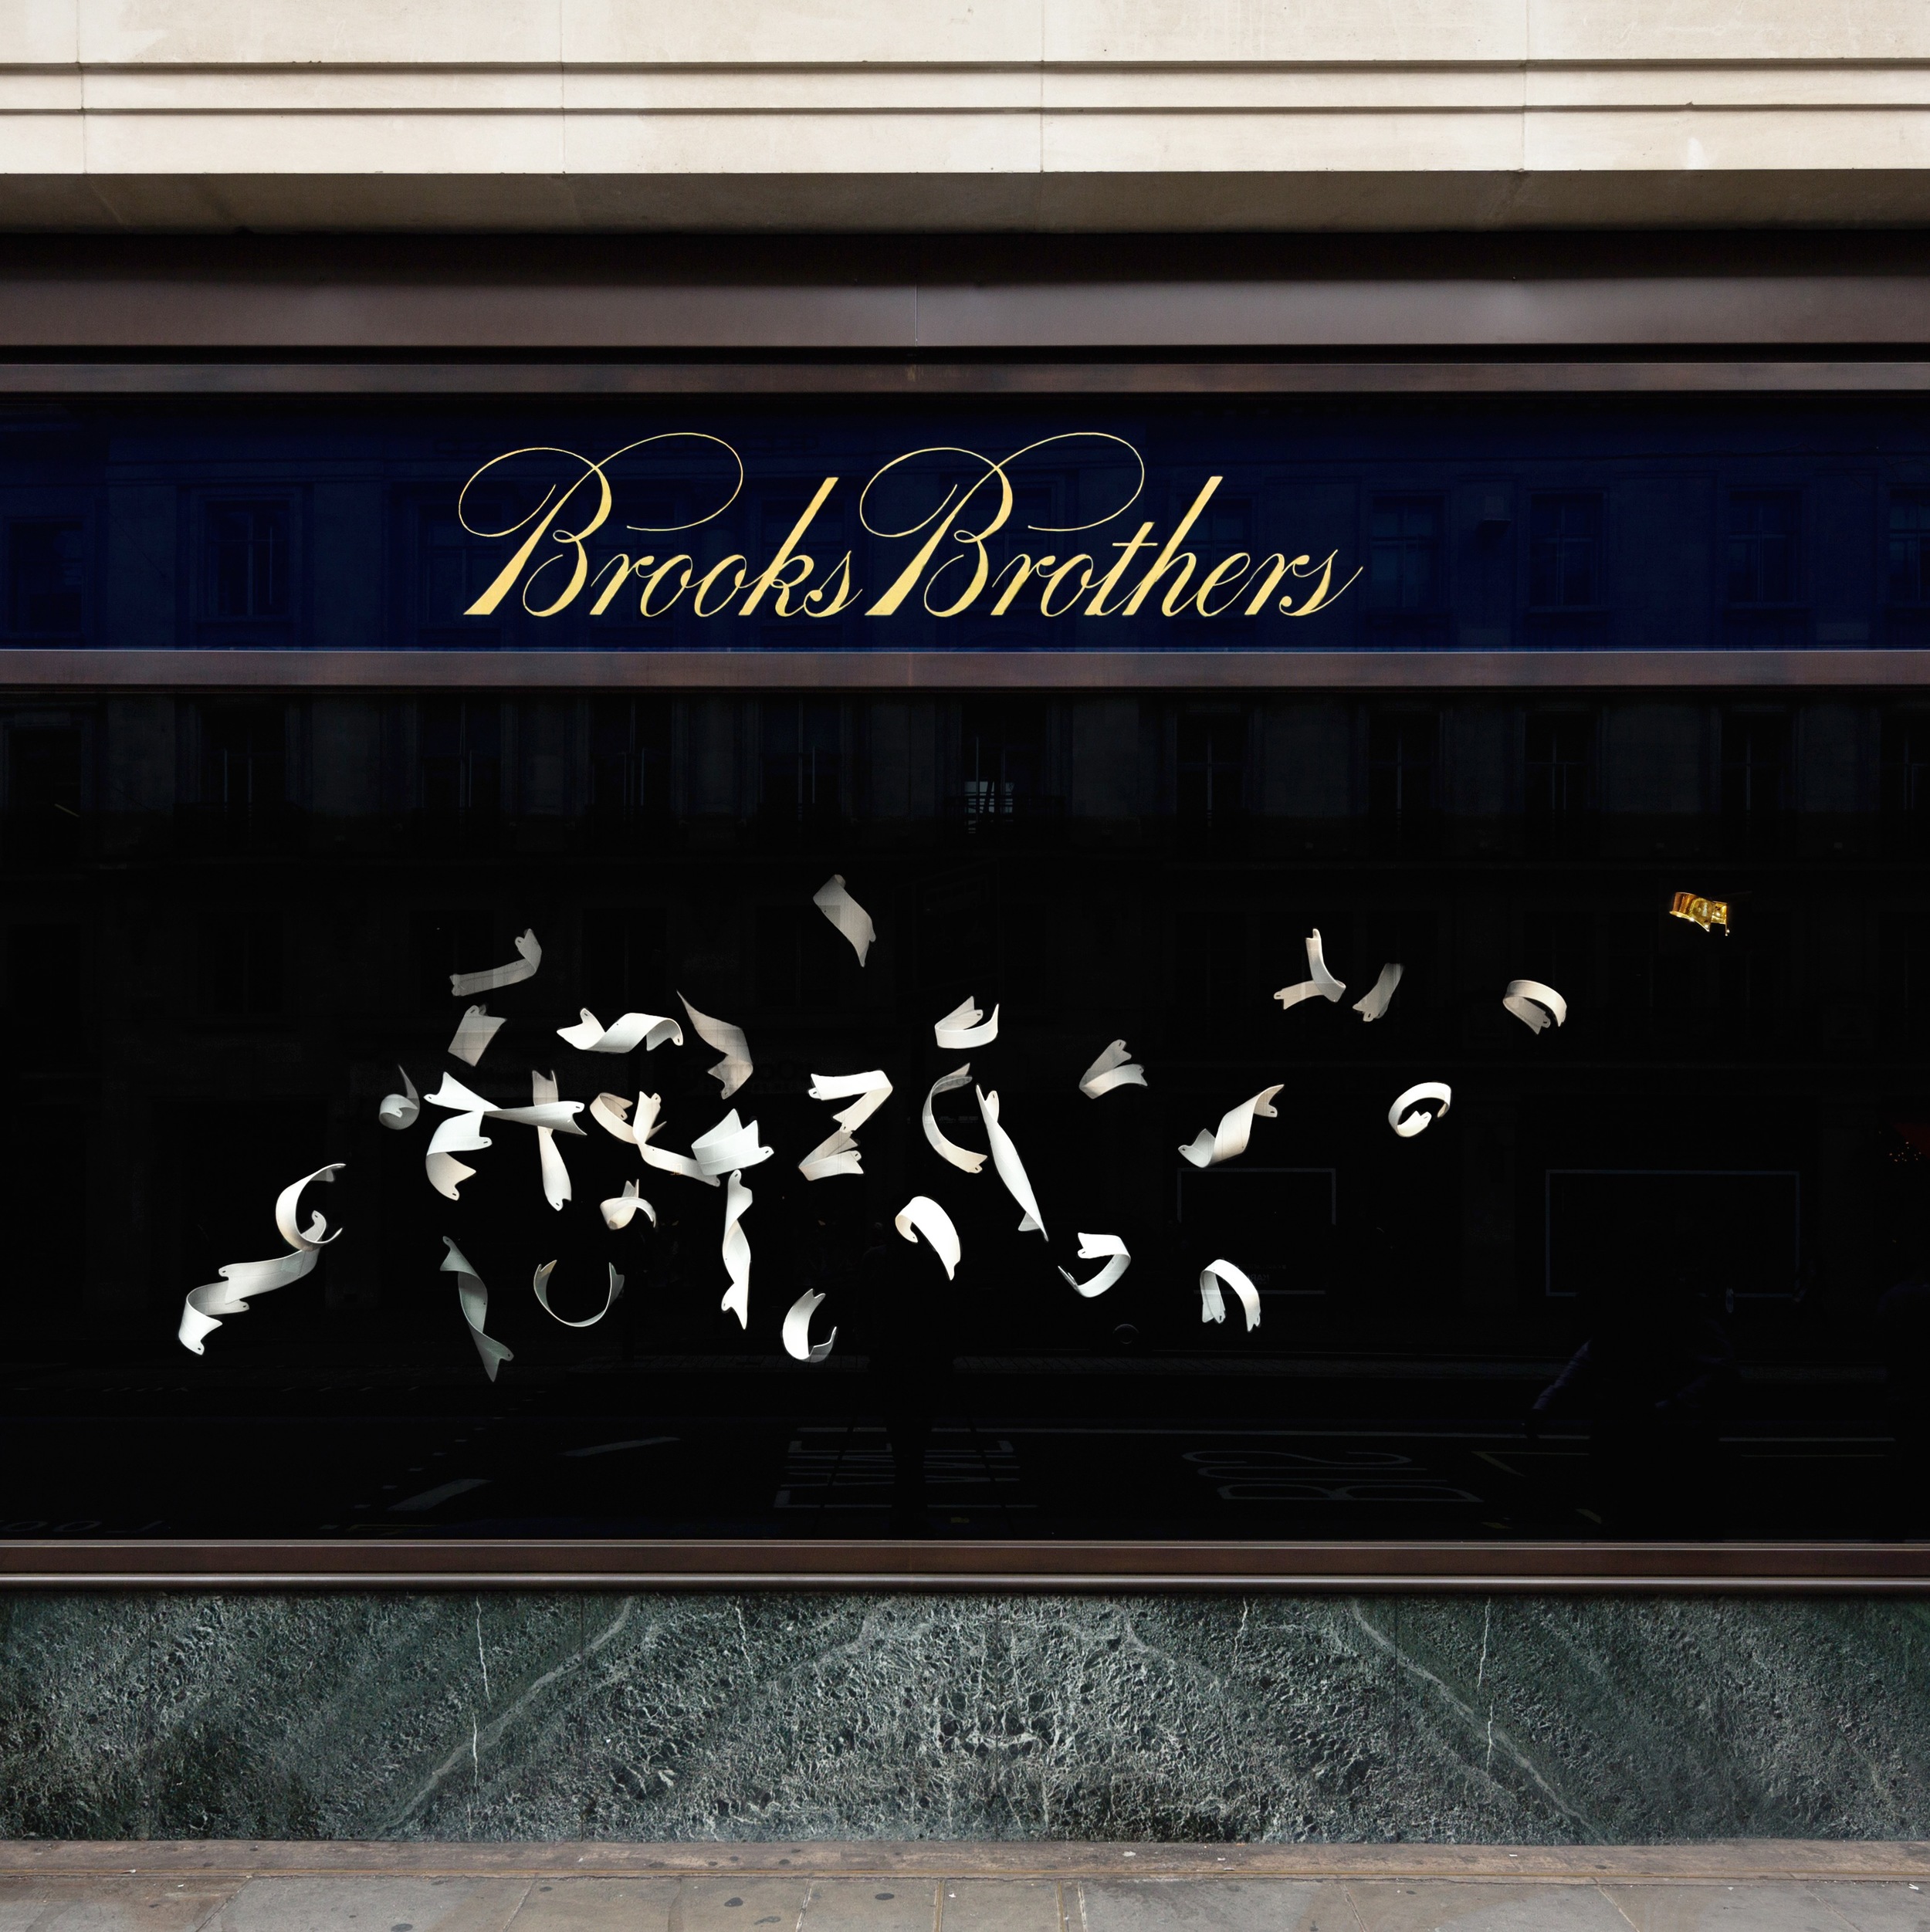 M_Conran and Partners RIBA Window for Brooks Brothers_photography by Liam Clarke 3.jpg